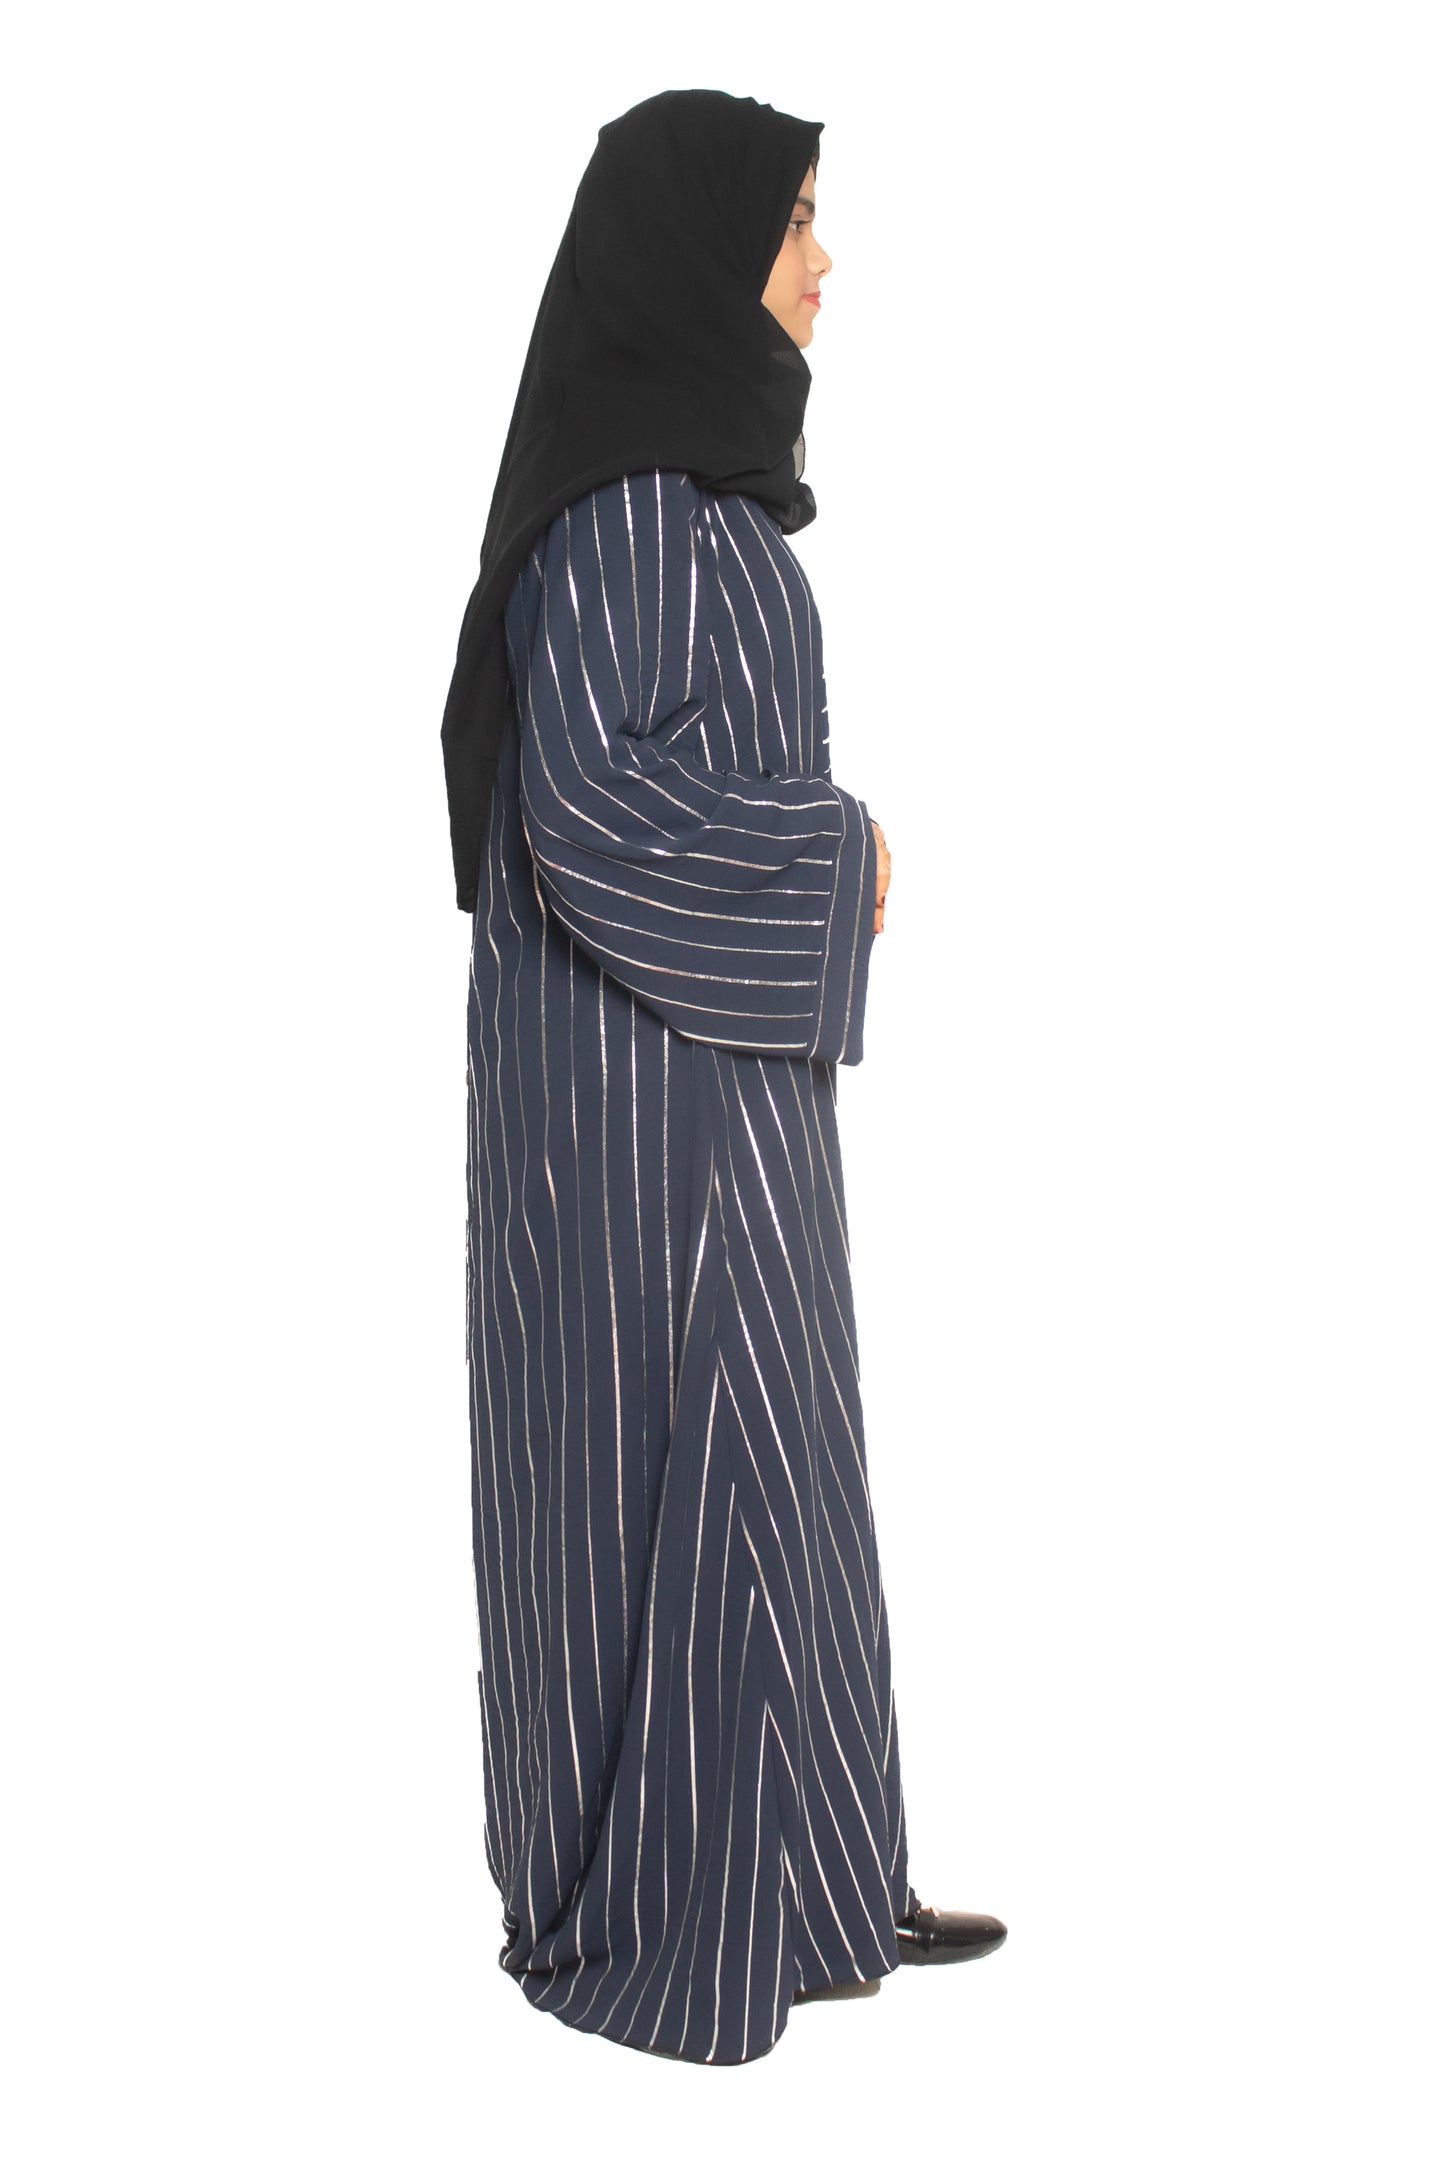 Modest City Self Design Blue Parallel Stripes With Broach Abaya or Burqa With Hijab for Women & Girls-Series Laiba